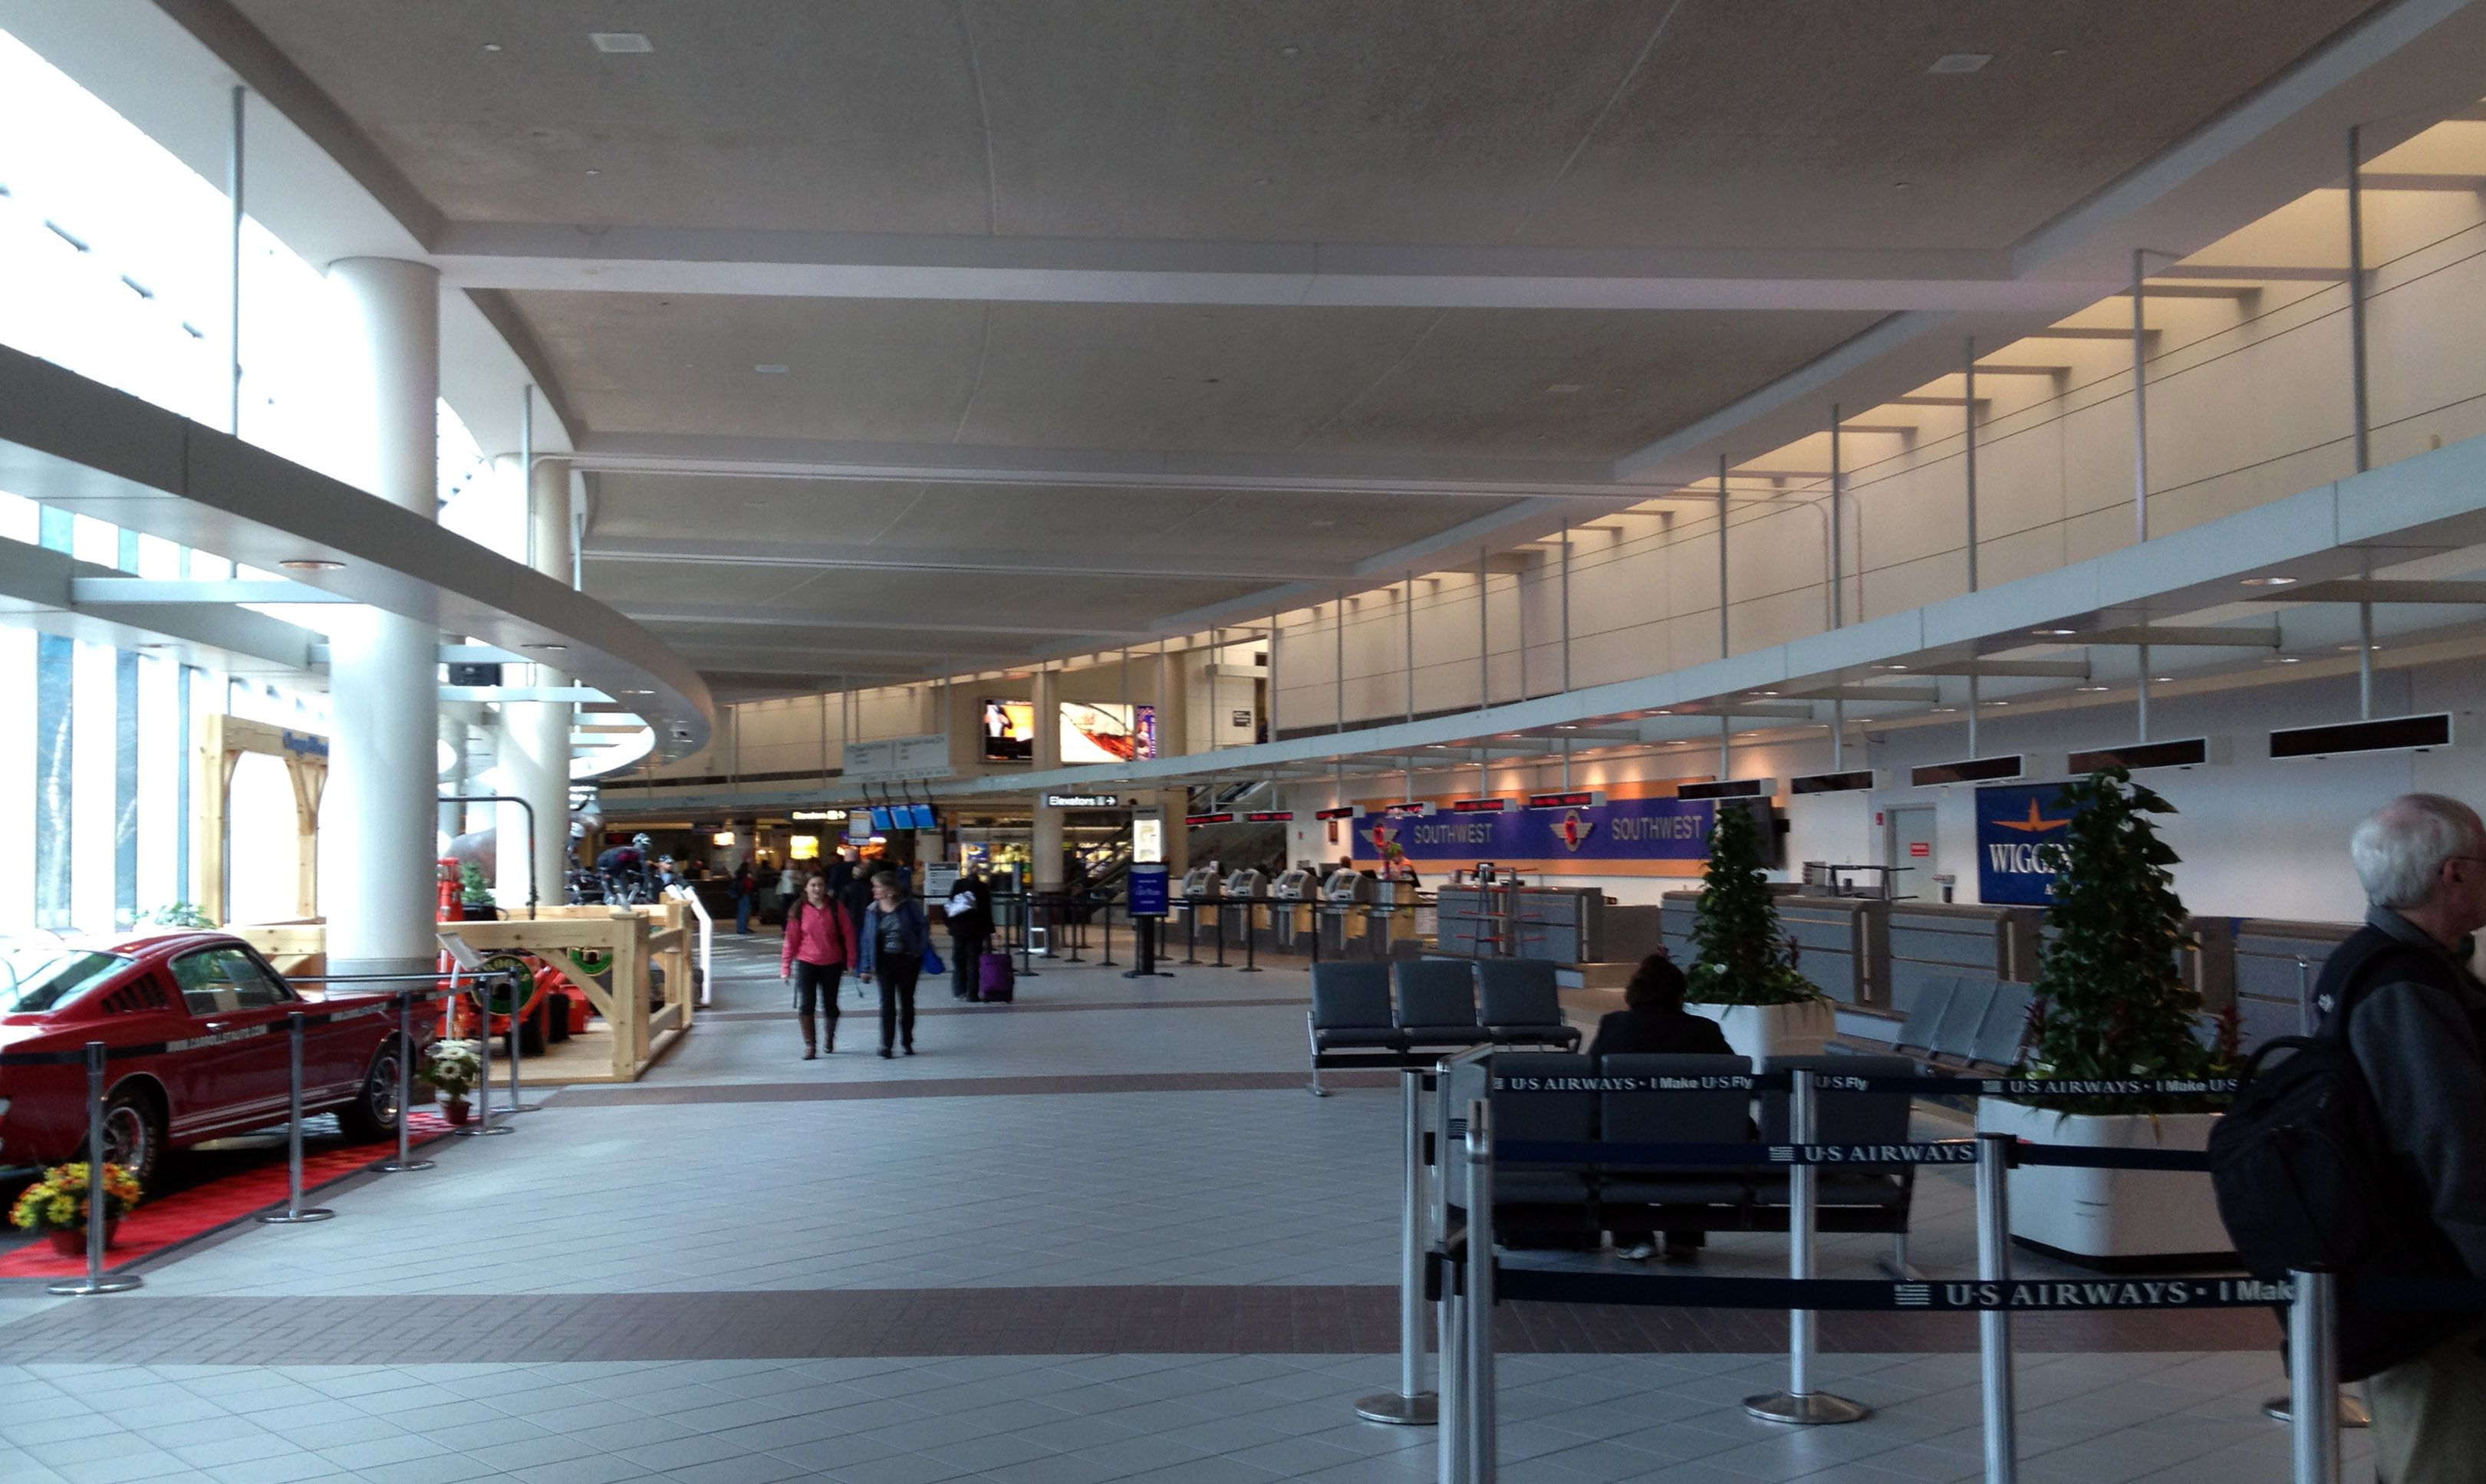 Interior of an airport terminal with passengers walking by check-in desks.